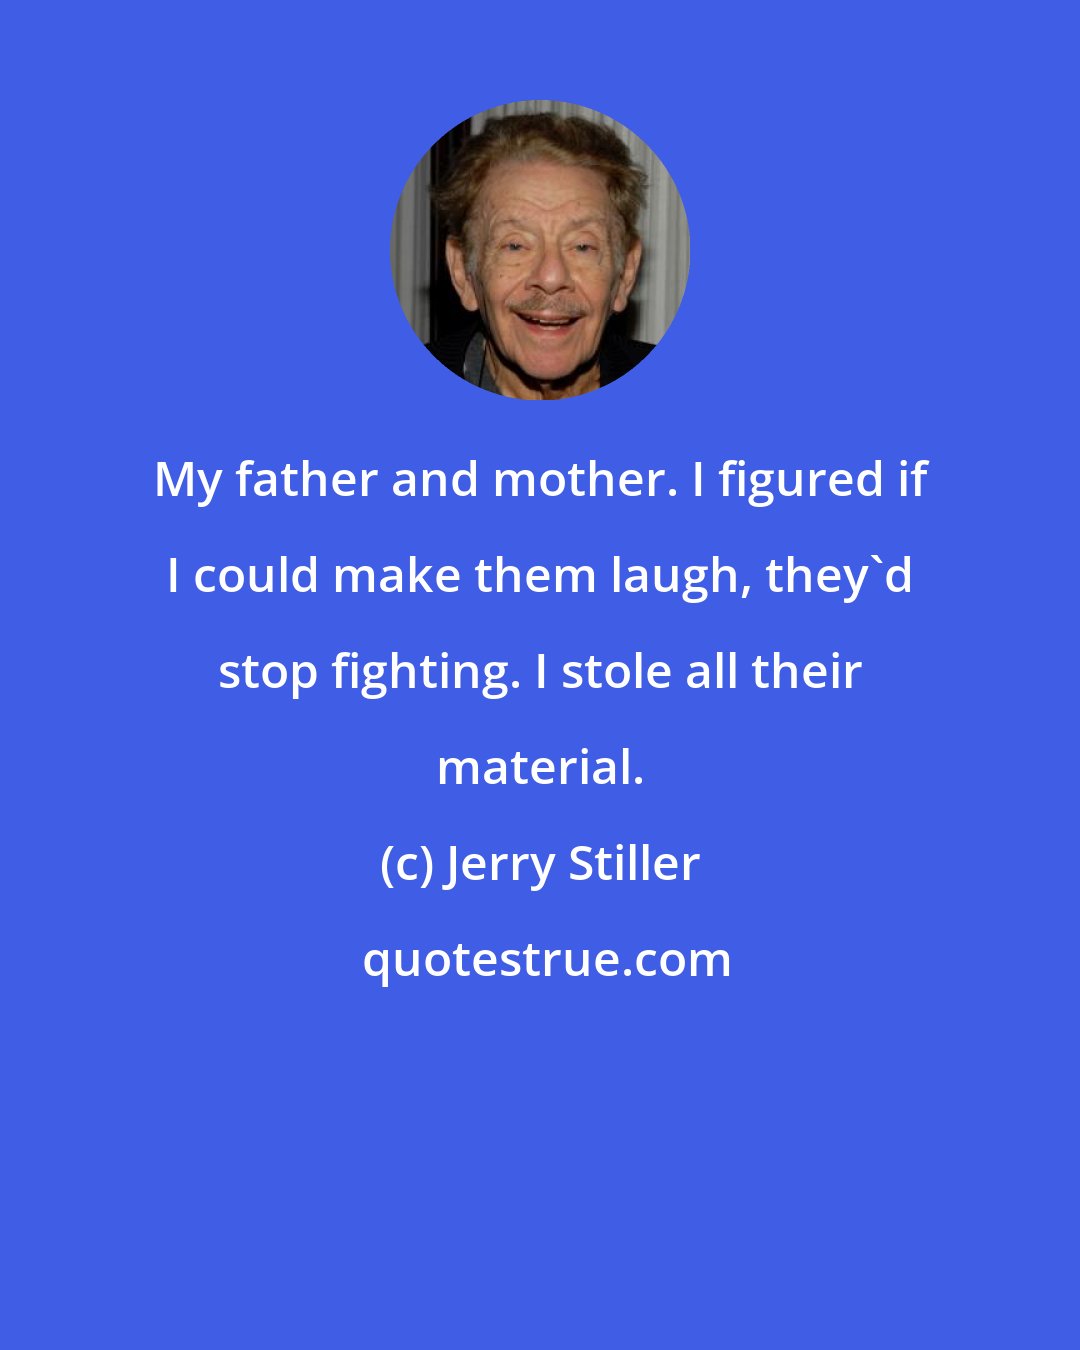 Jerry Stiller: My father and mother. I figured if I could make them laugh, they'd stop fighting. I stole all their material.